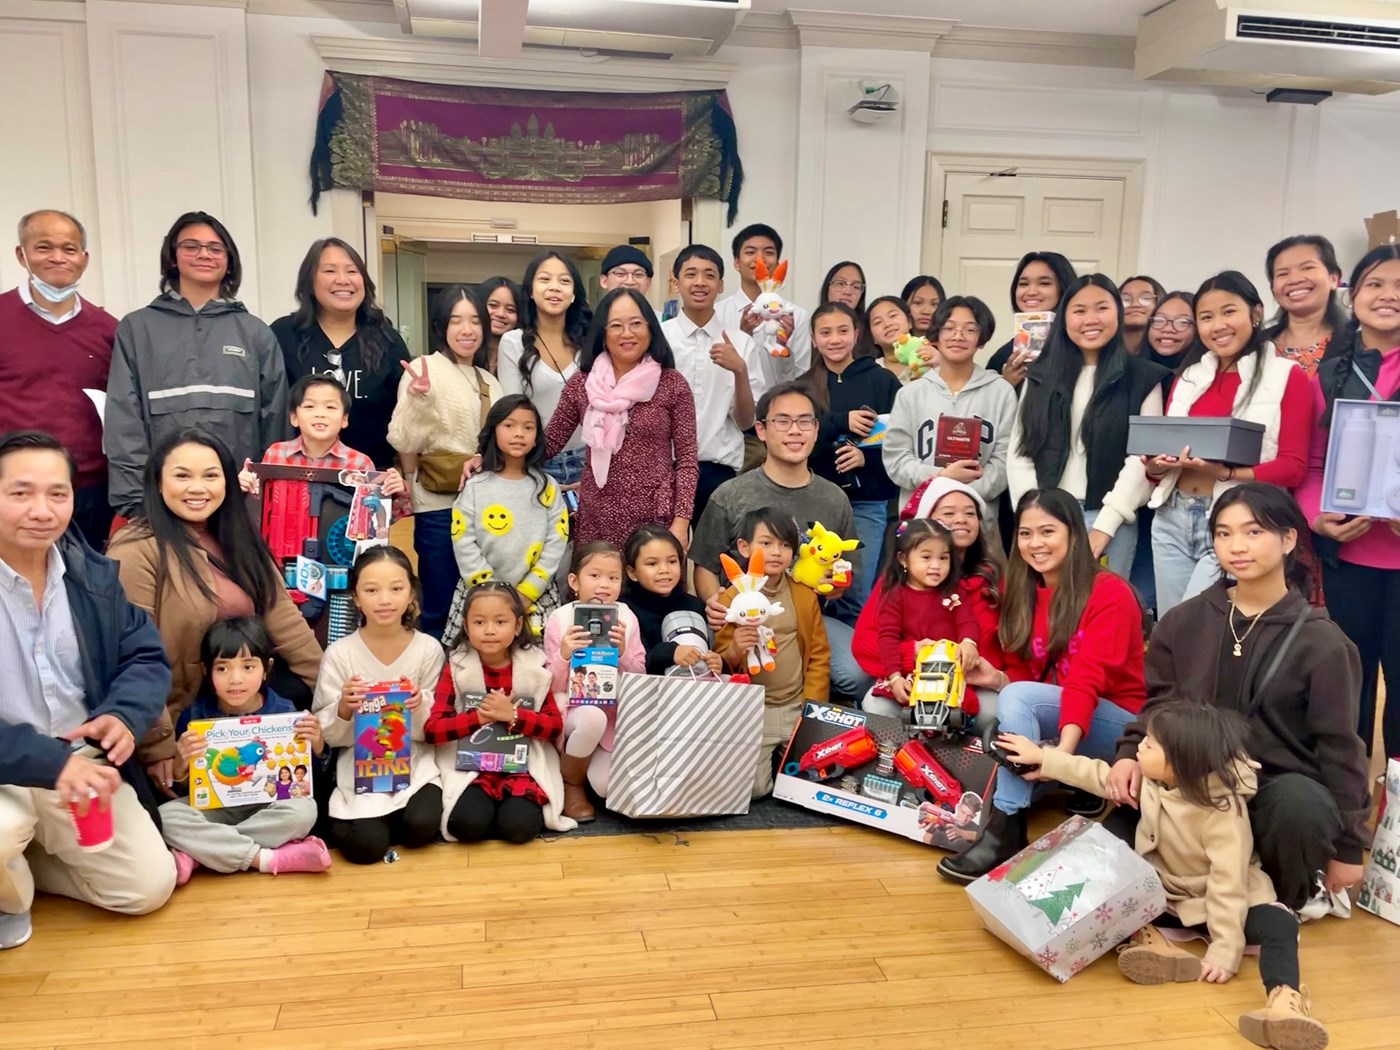 Angkor Dance Troupe gathering at Asian American Center for Excellence & Engagement in December 2022.